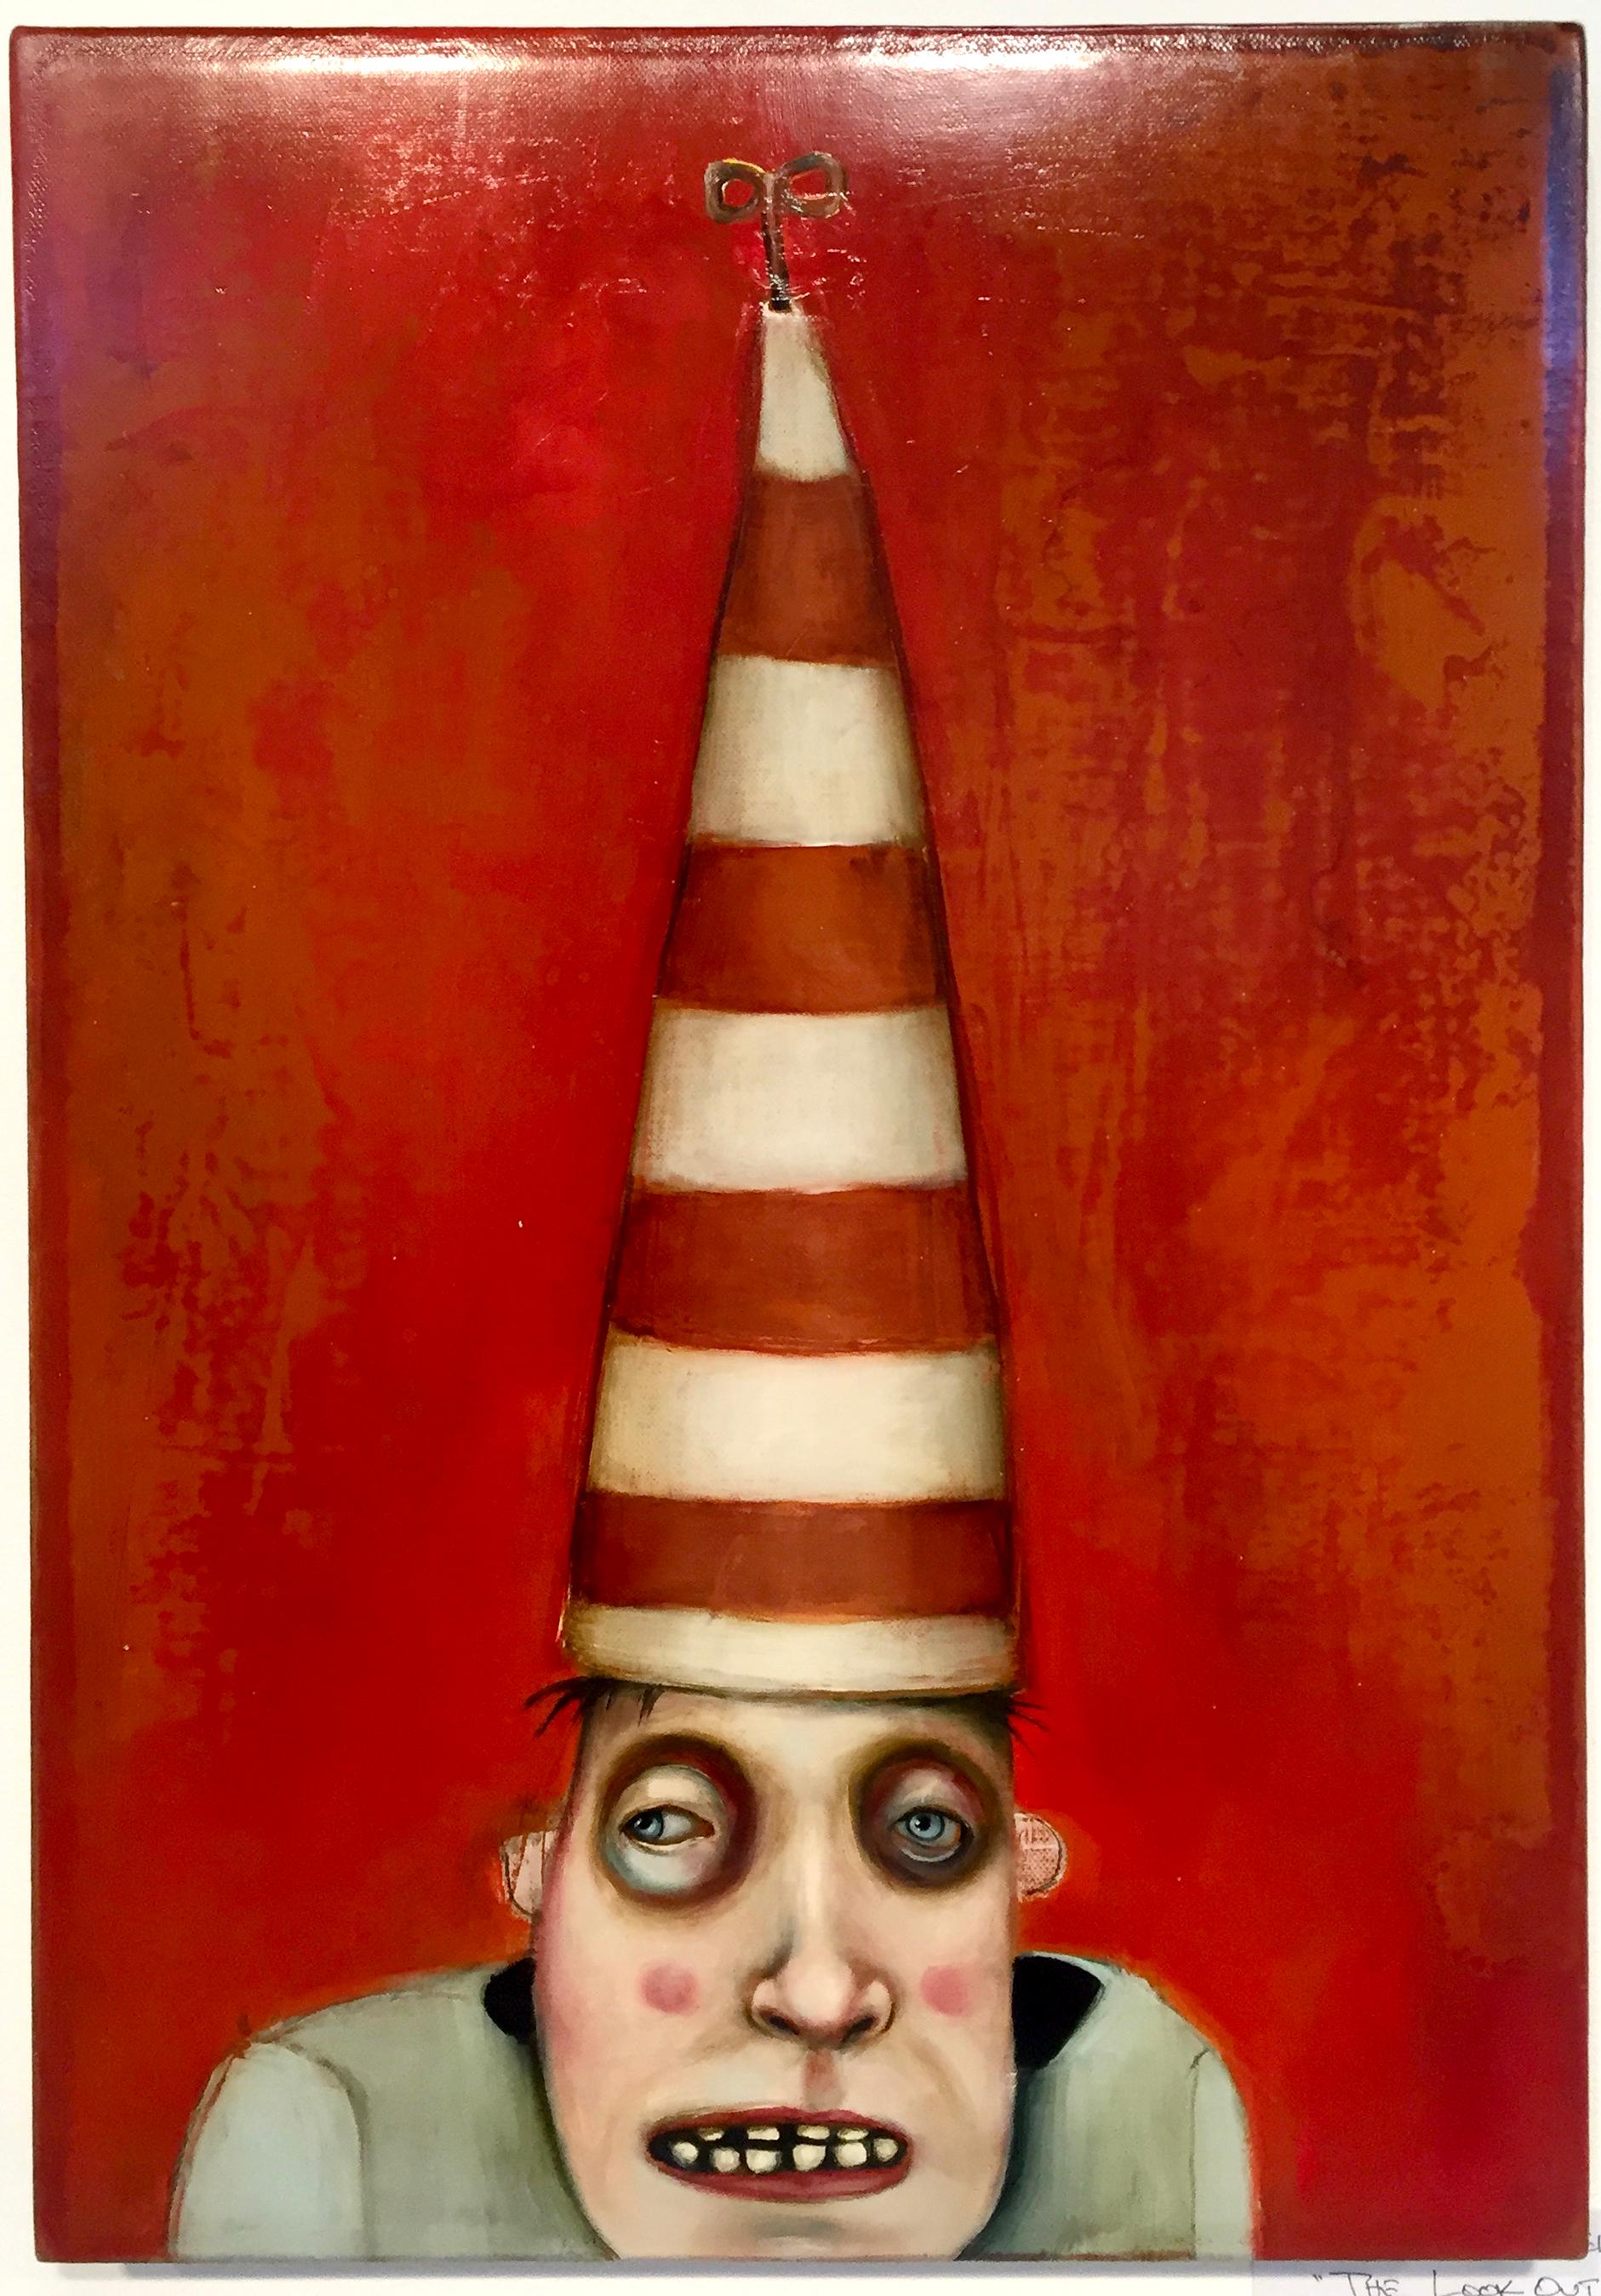 The Lookout by Mikesell, Oil on canvas, red pop figurative whimsical painting - Painting by Michele Mikesell